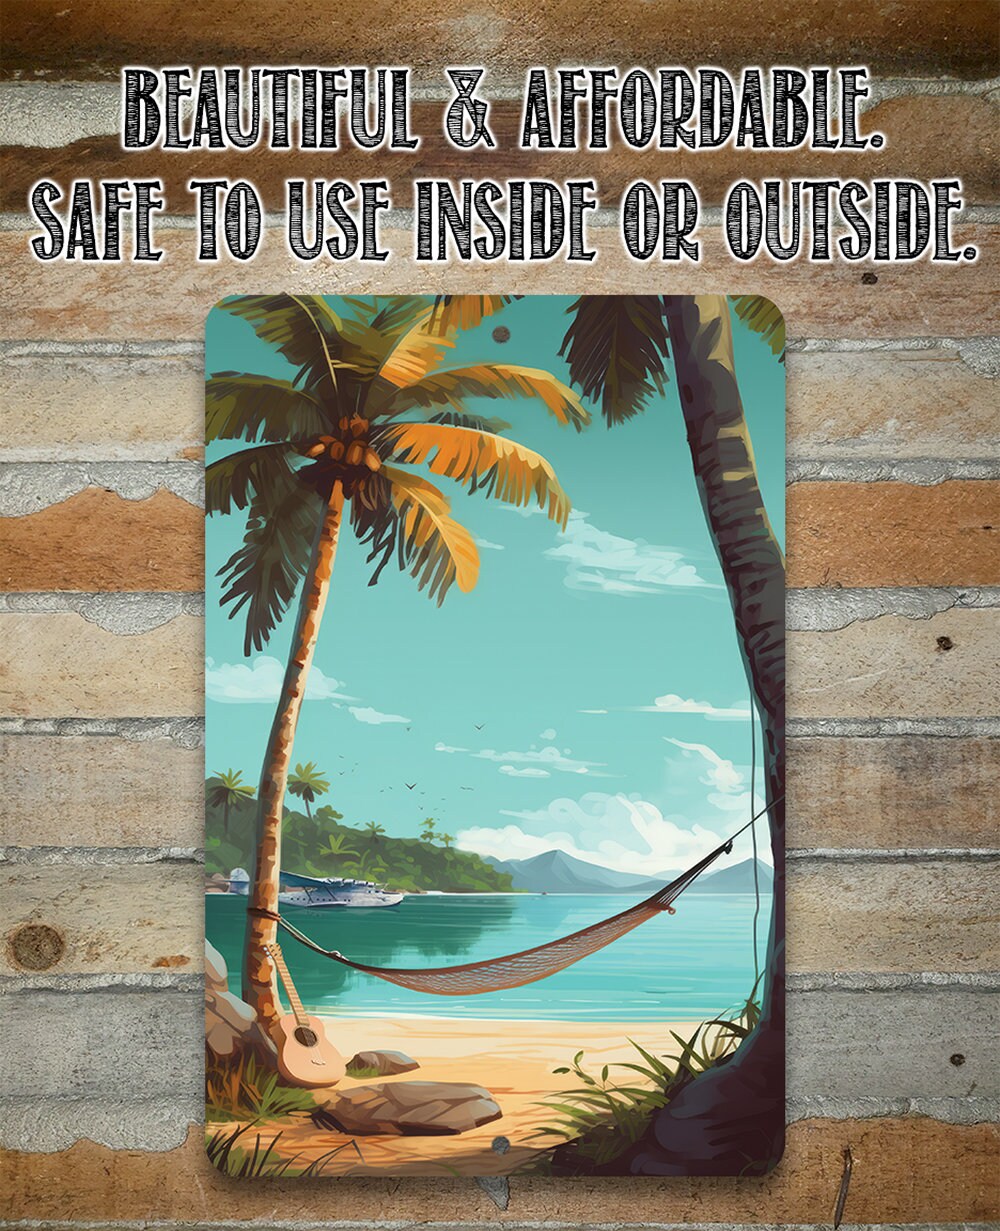 Tin - Another Day in Paradise - Beach House and Summer Surfing Decor - Durable Metal Sign - 8" x 12" or 12" x 18" Use Indoor/Outdoor - Gift